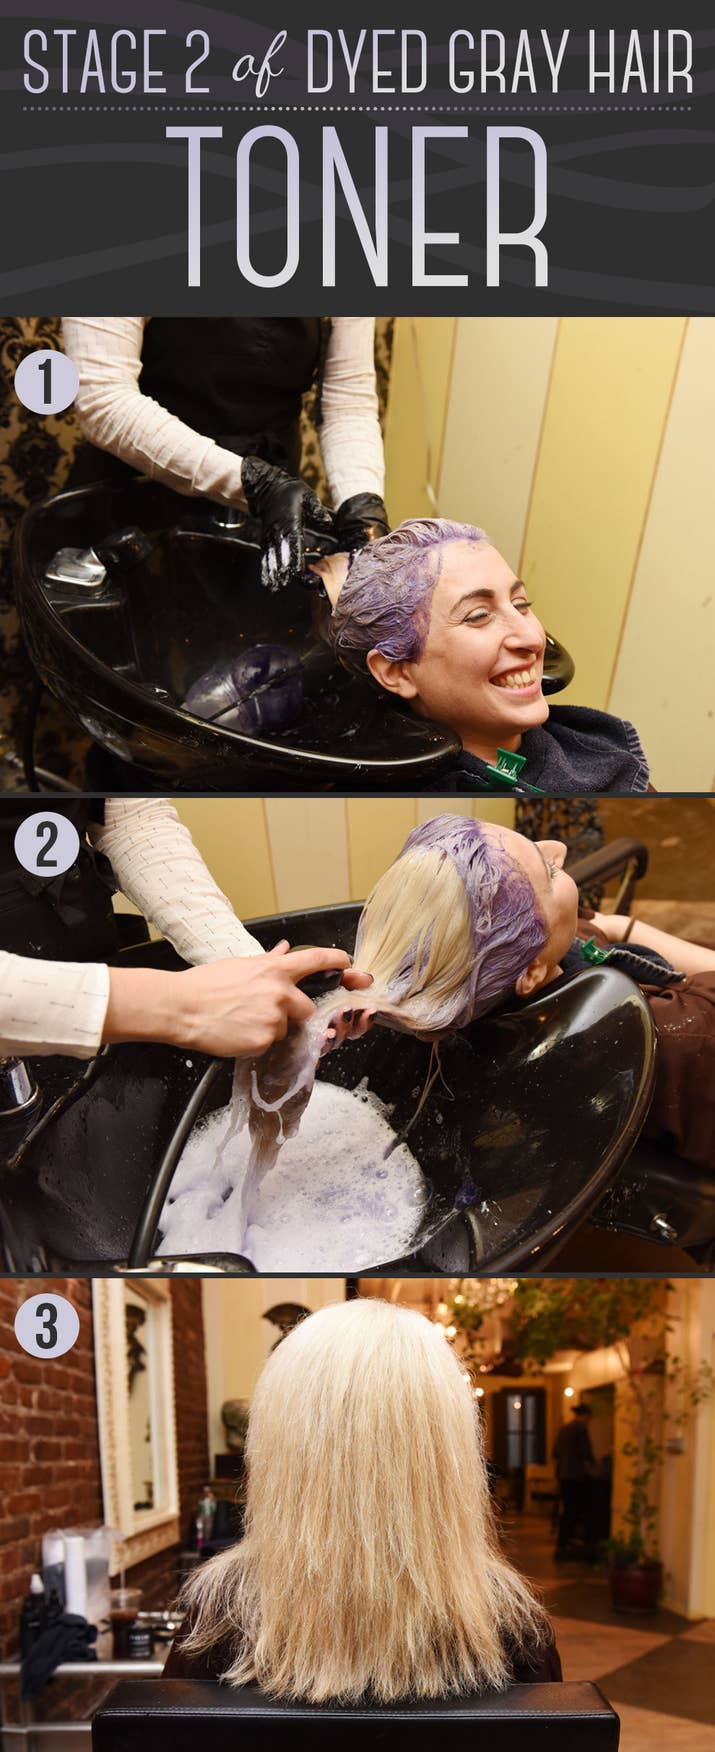 Here Is Every Little Detail On How To Dye Your Hair Gray